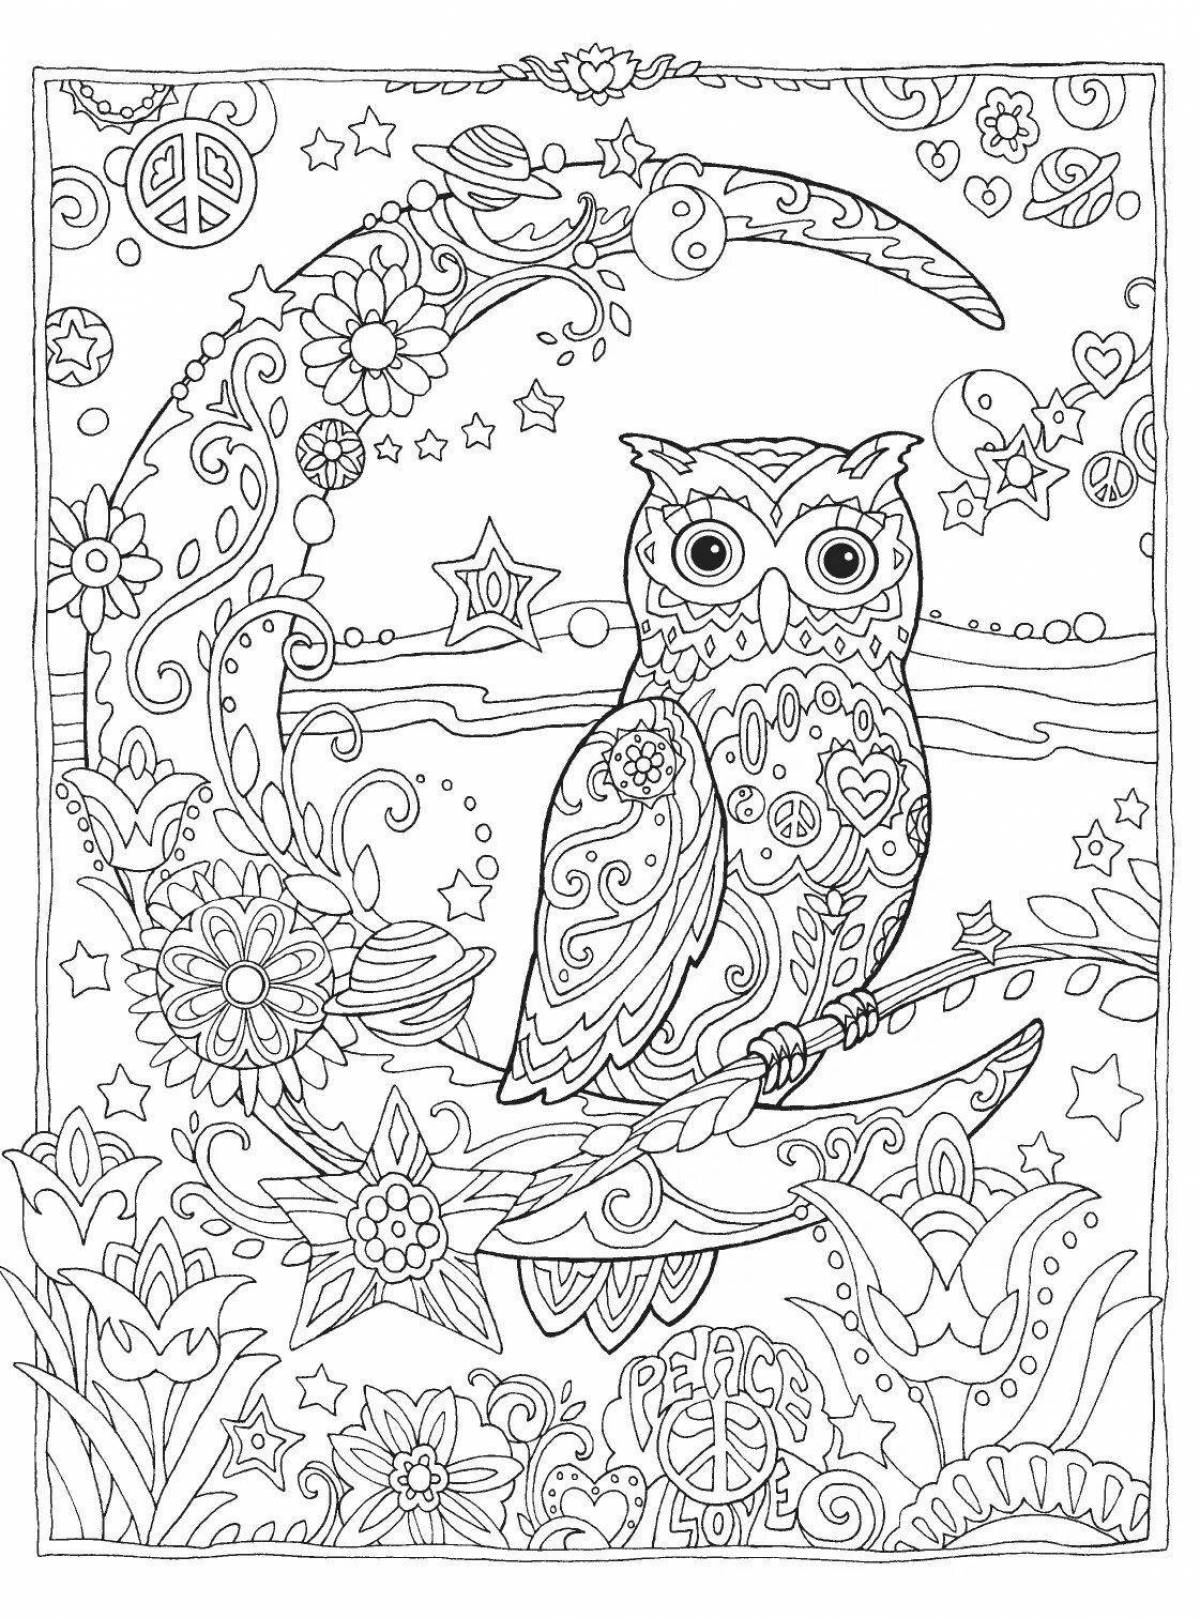 Soothing coloring book for children